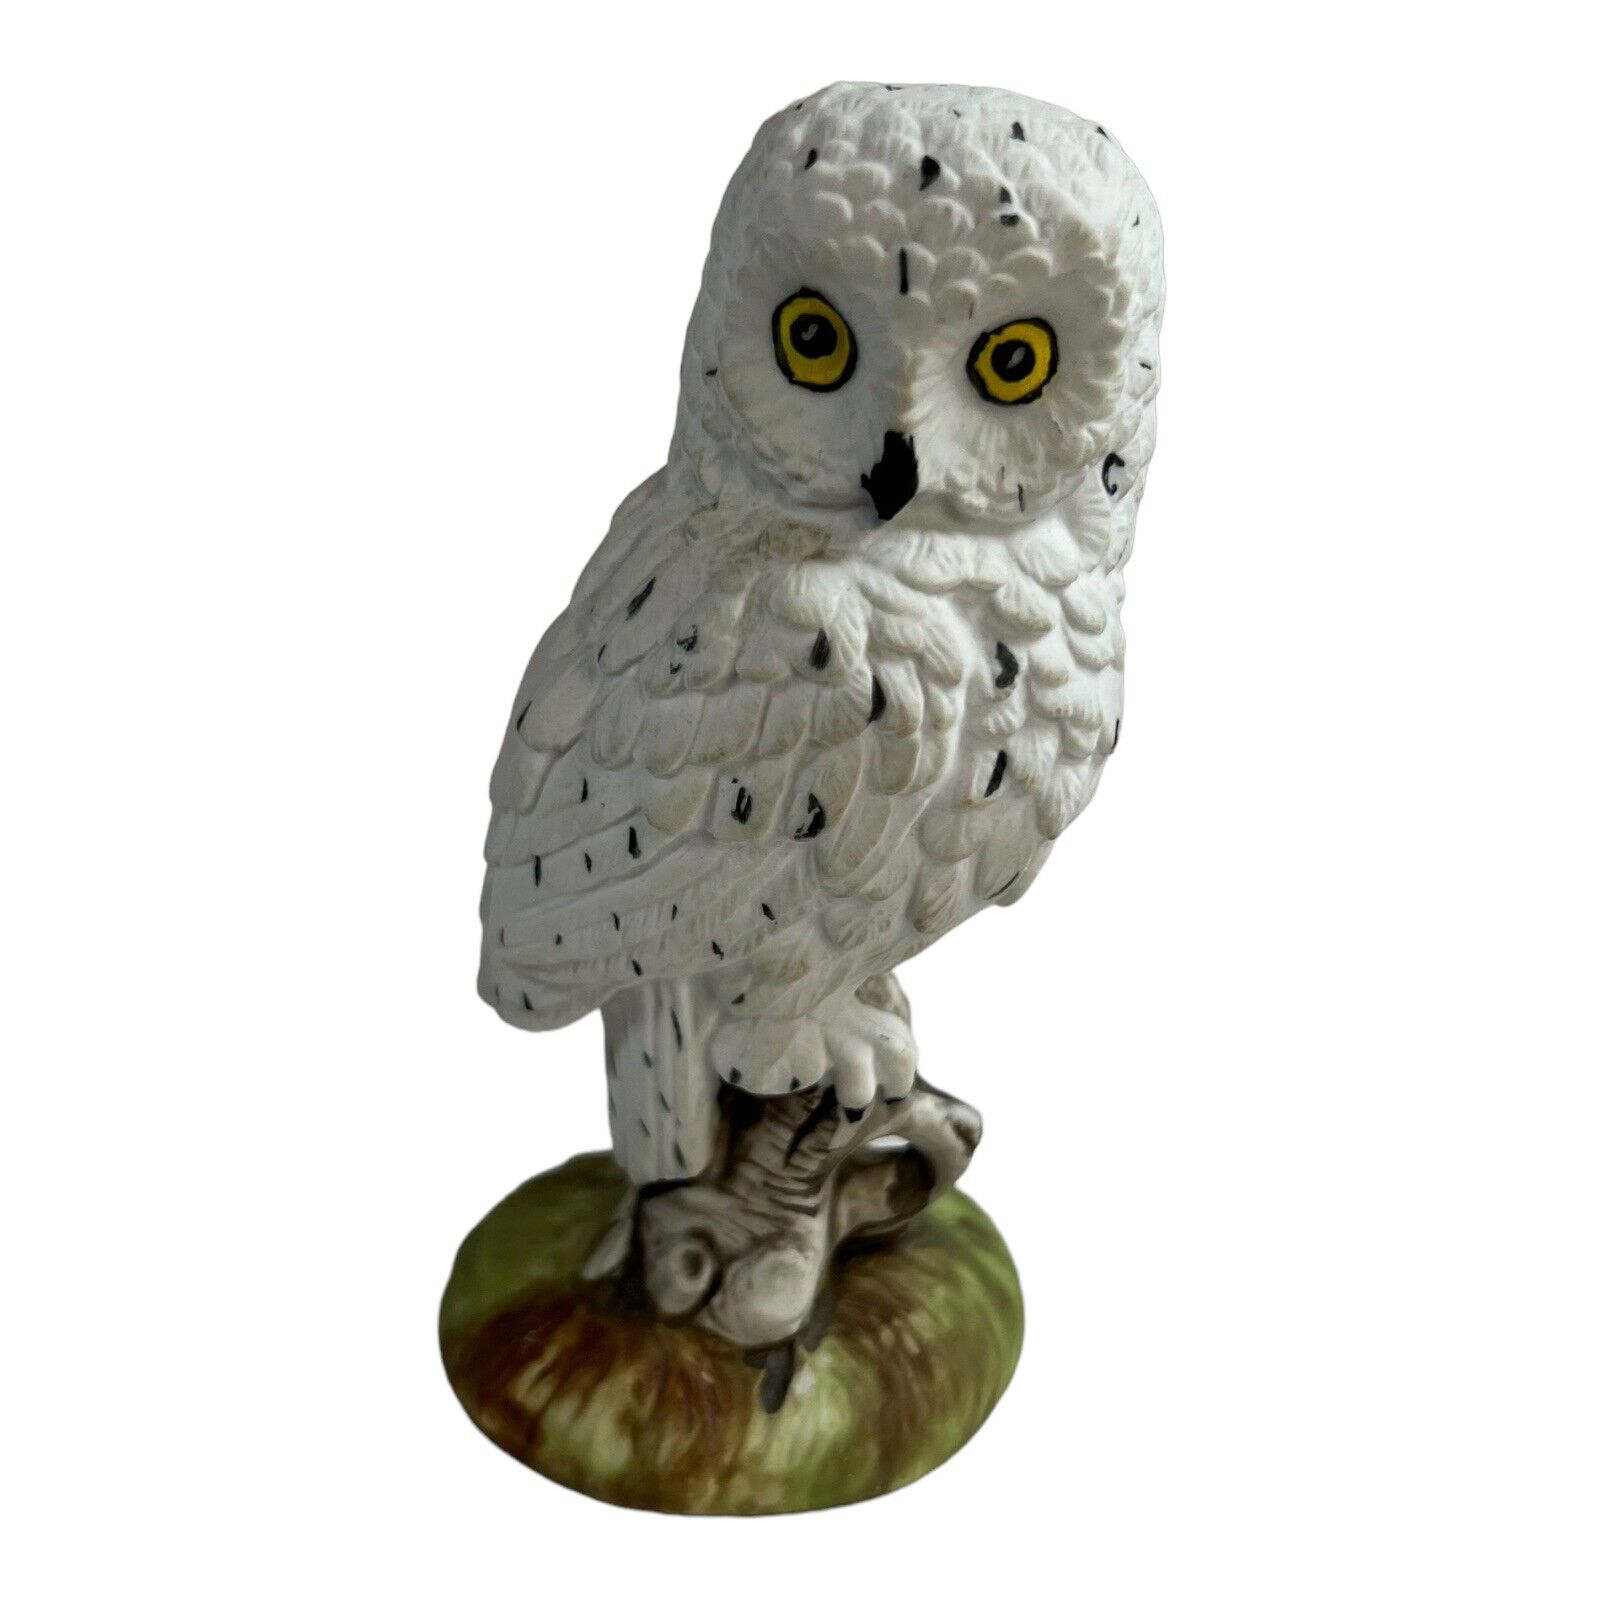 Vintage Snowy Owl Mystical White Owl Tree Branch Paperweight Figurine Wide Eyed